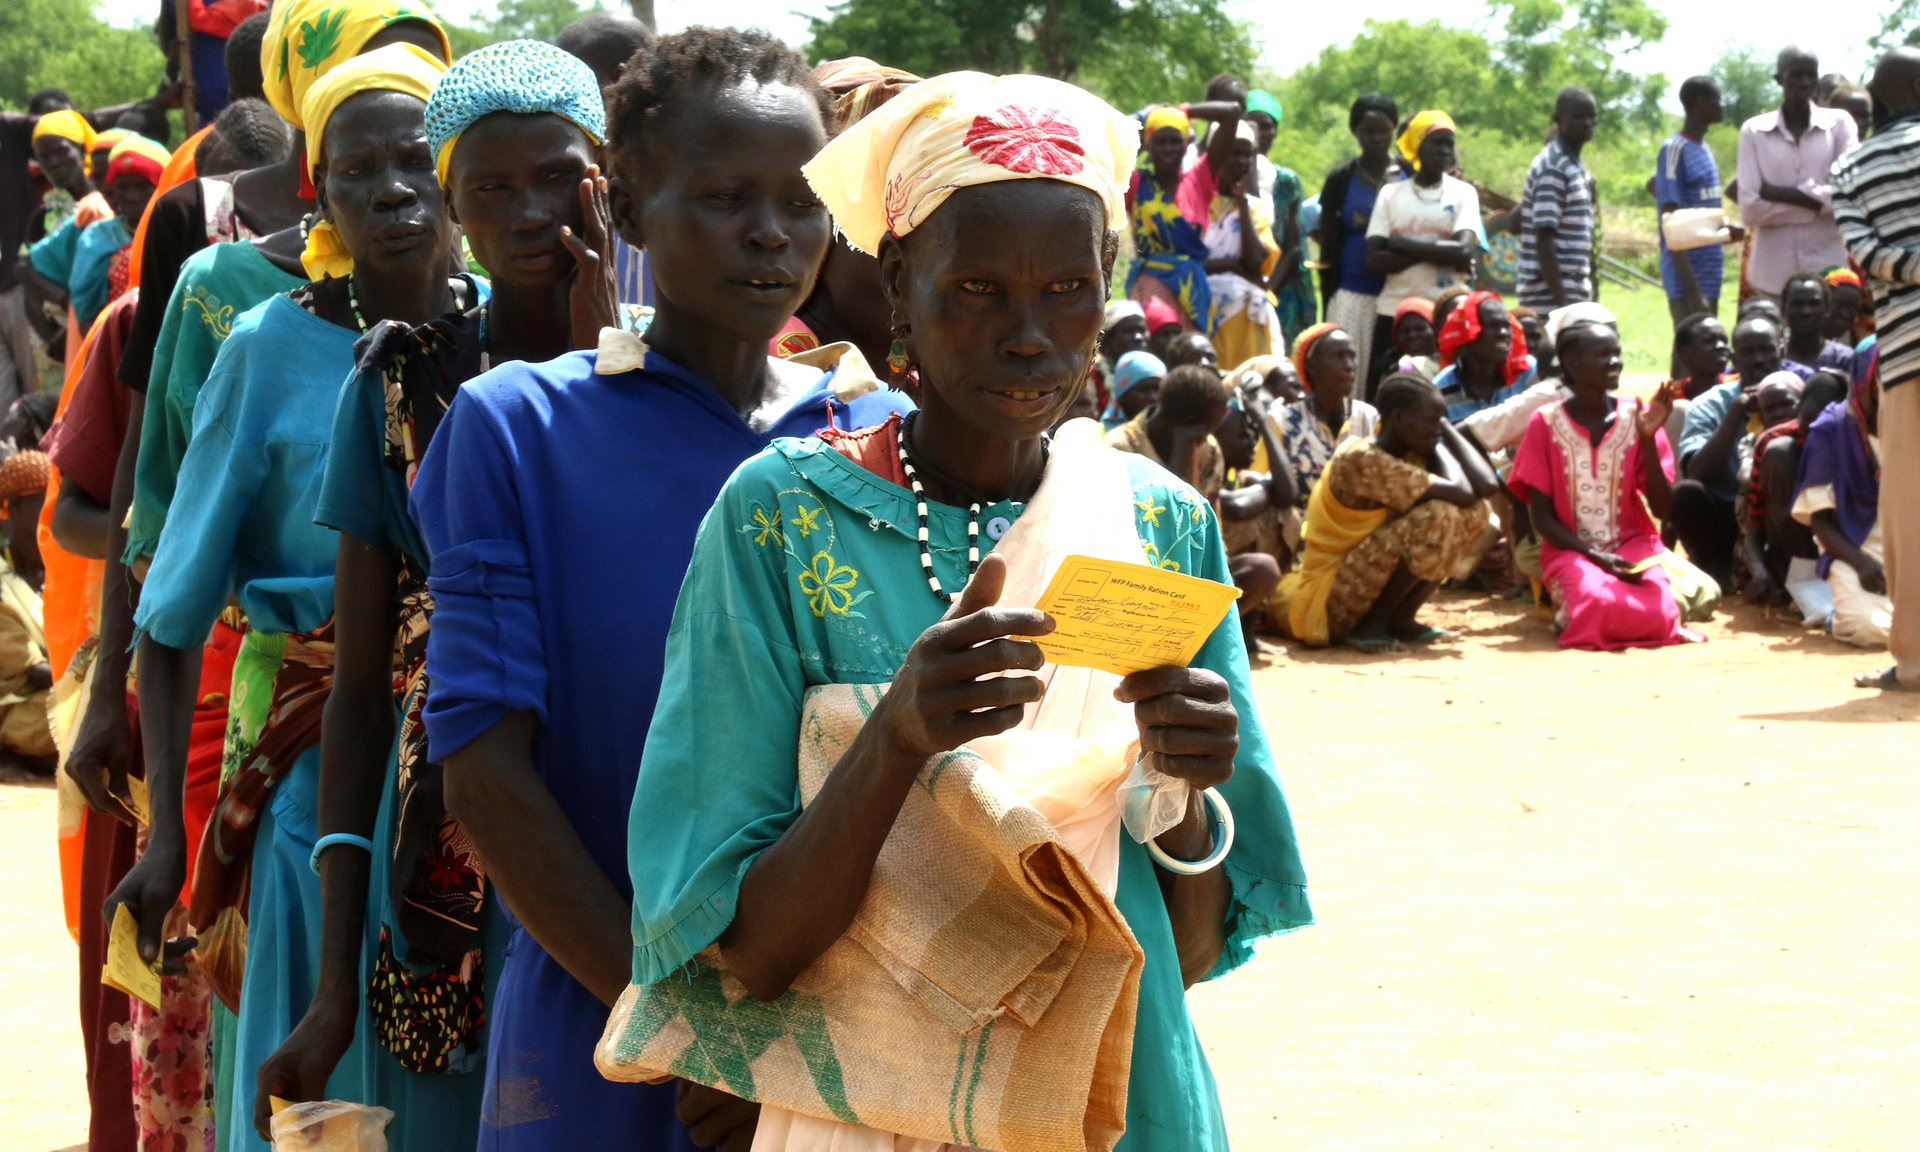 People line up for food distributions near the town of Aweil in Northern Bahr el Ghazal. Although largely unaffected by the conflict, the region has recorded high malnutrition rates. Photograph: Simona Foltyn